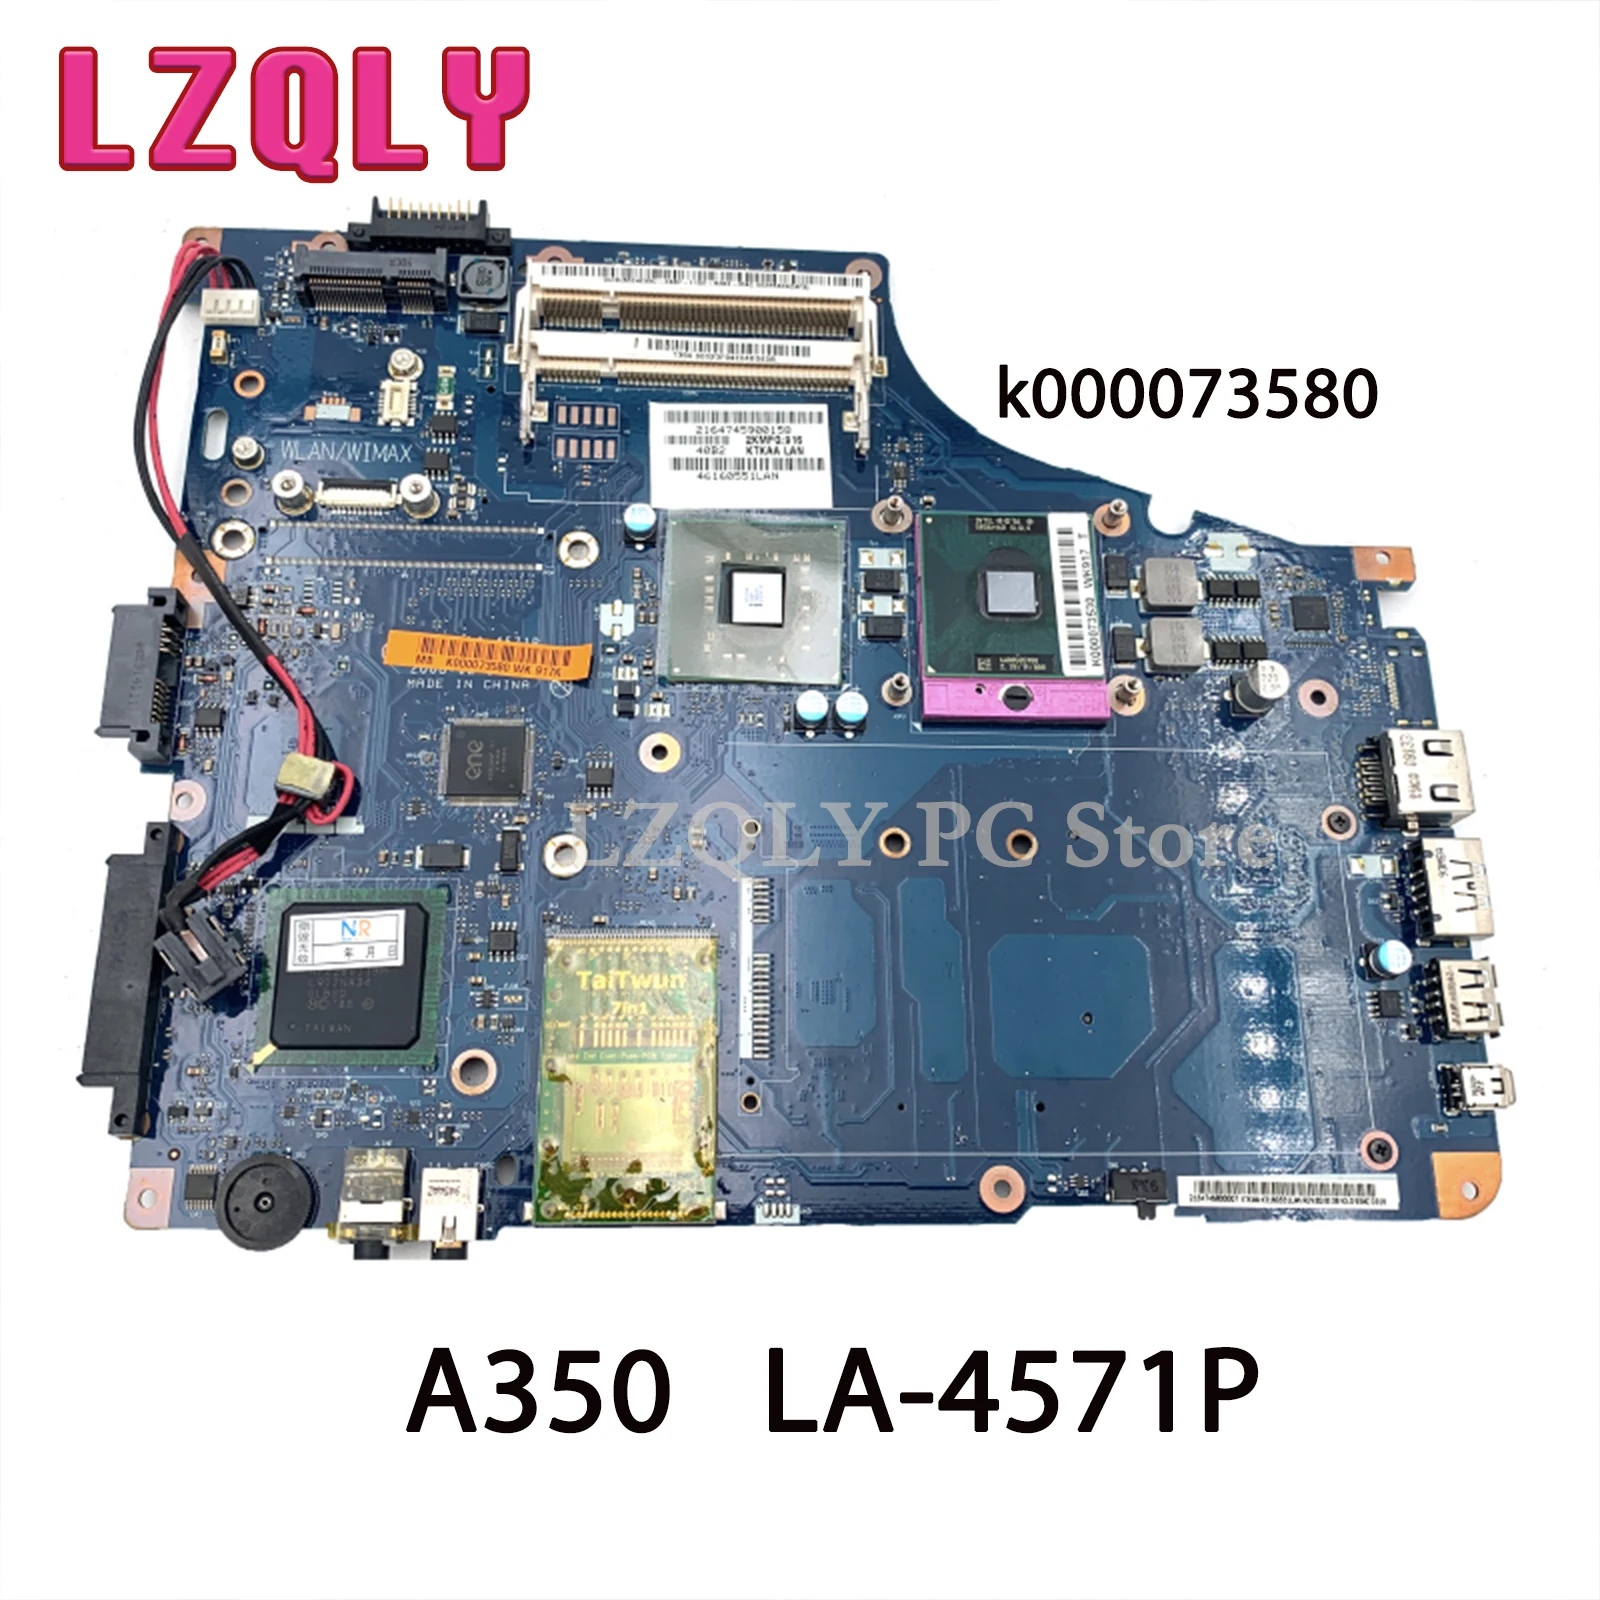 

LZQLY For Toshiba Satellite A350 KTKAA LA-4571P K000073580 Laptop Motherboard DDR2 Without Graphics Slot Free CPU Main Board